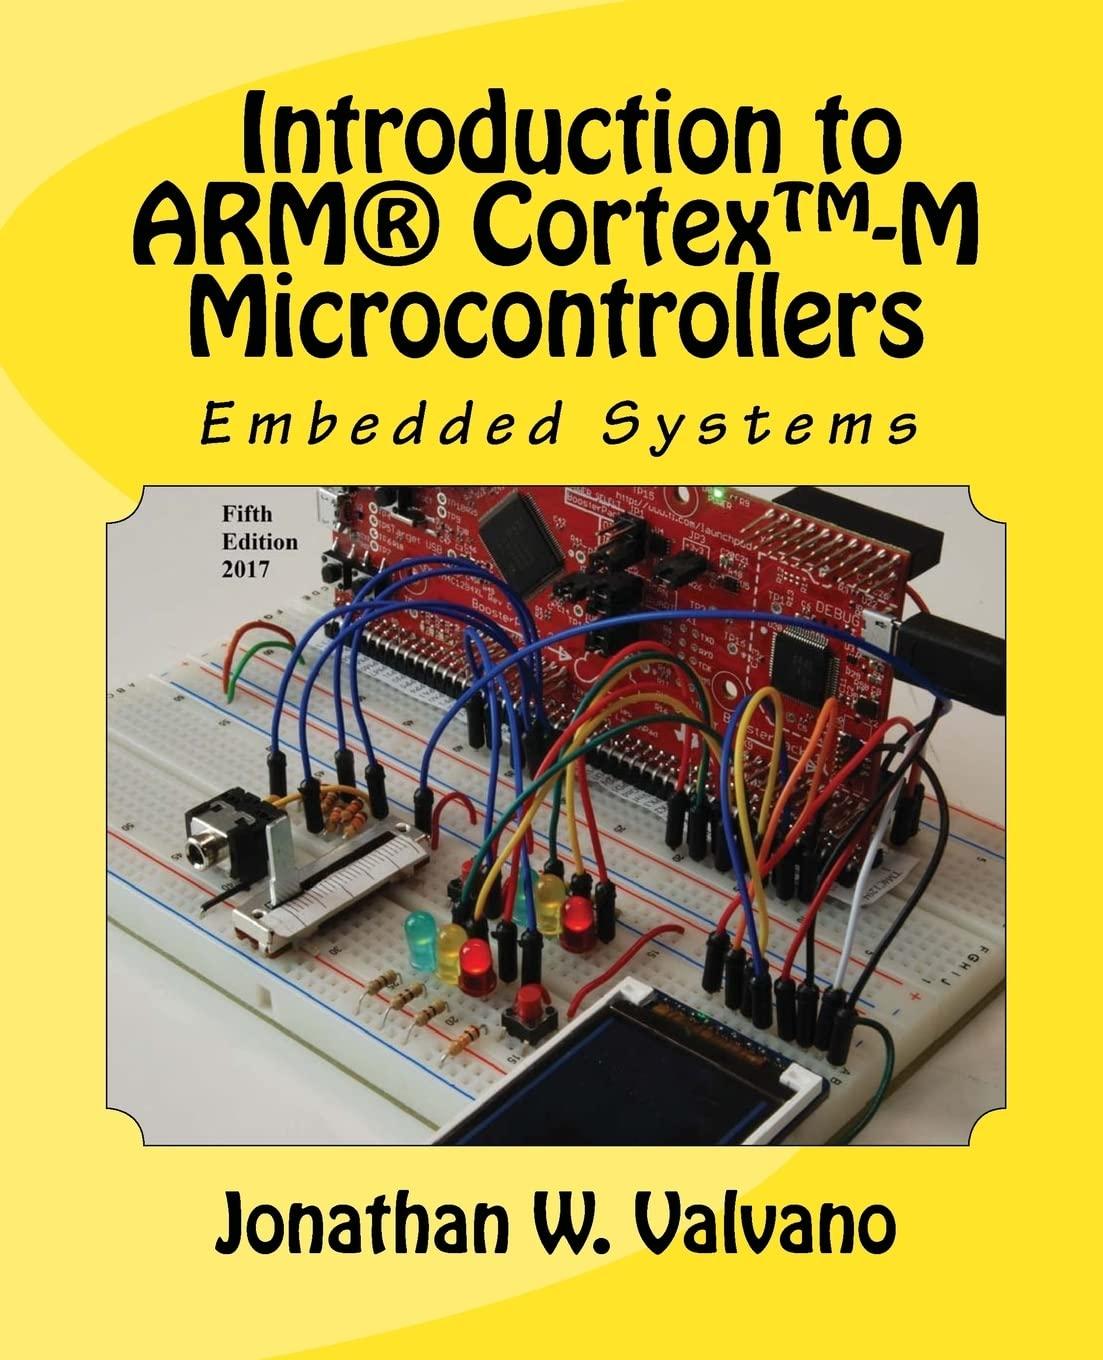 Embedded Systems  Introduction To Arm® Cortex™ M Microcontrollers